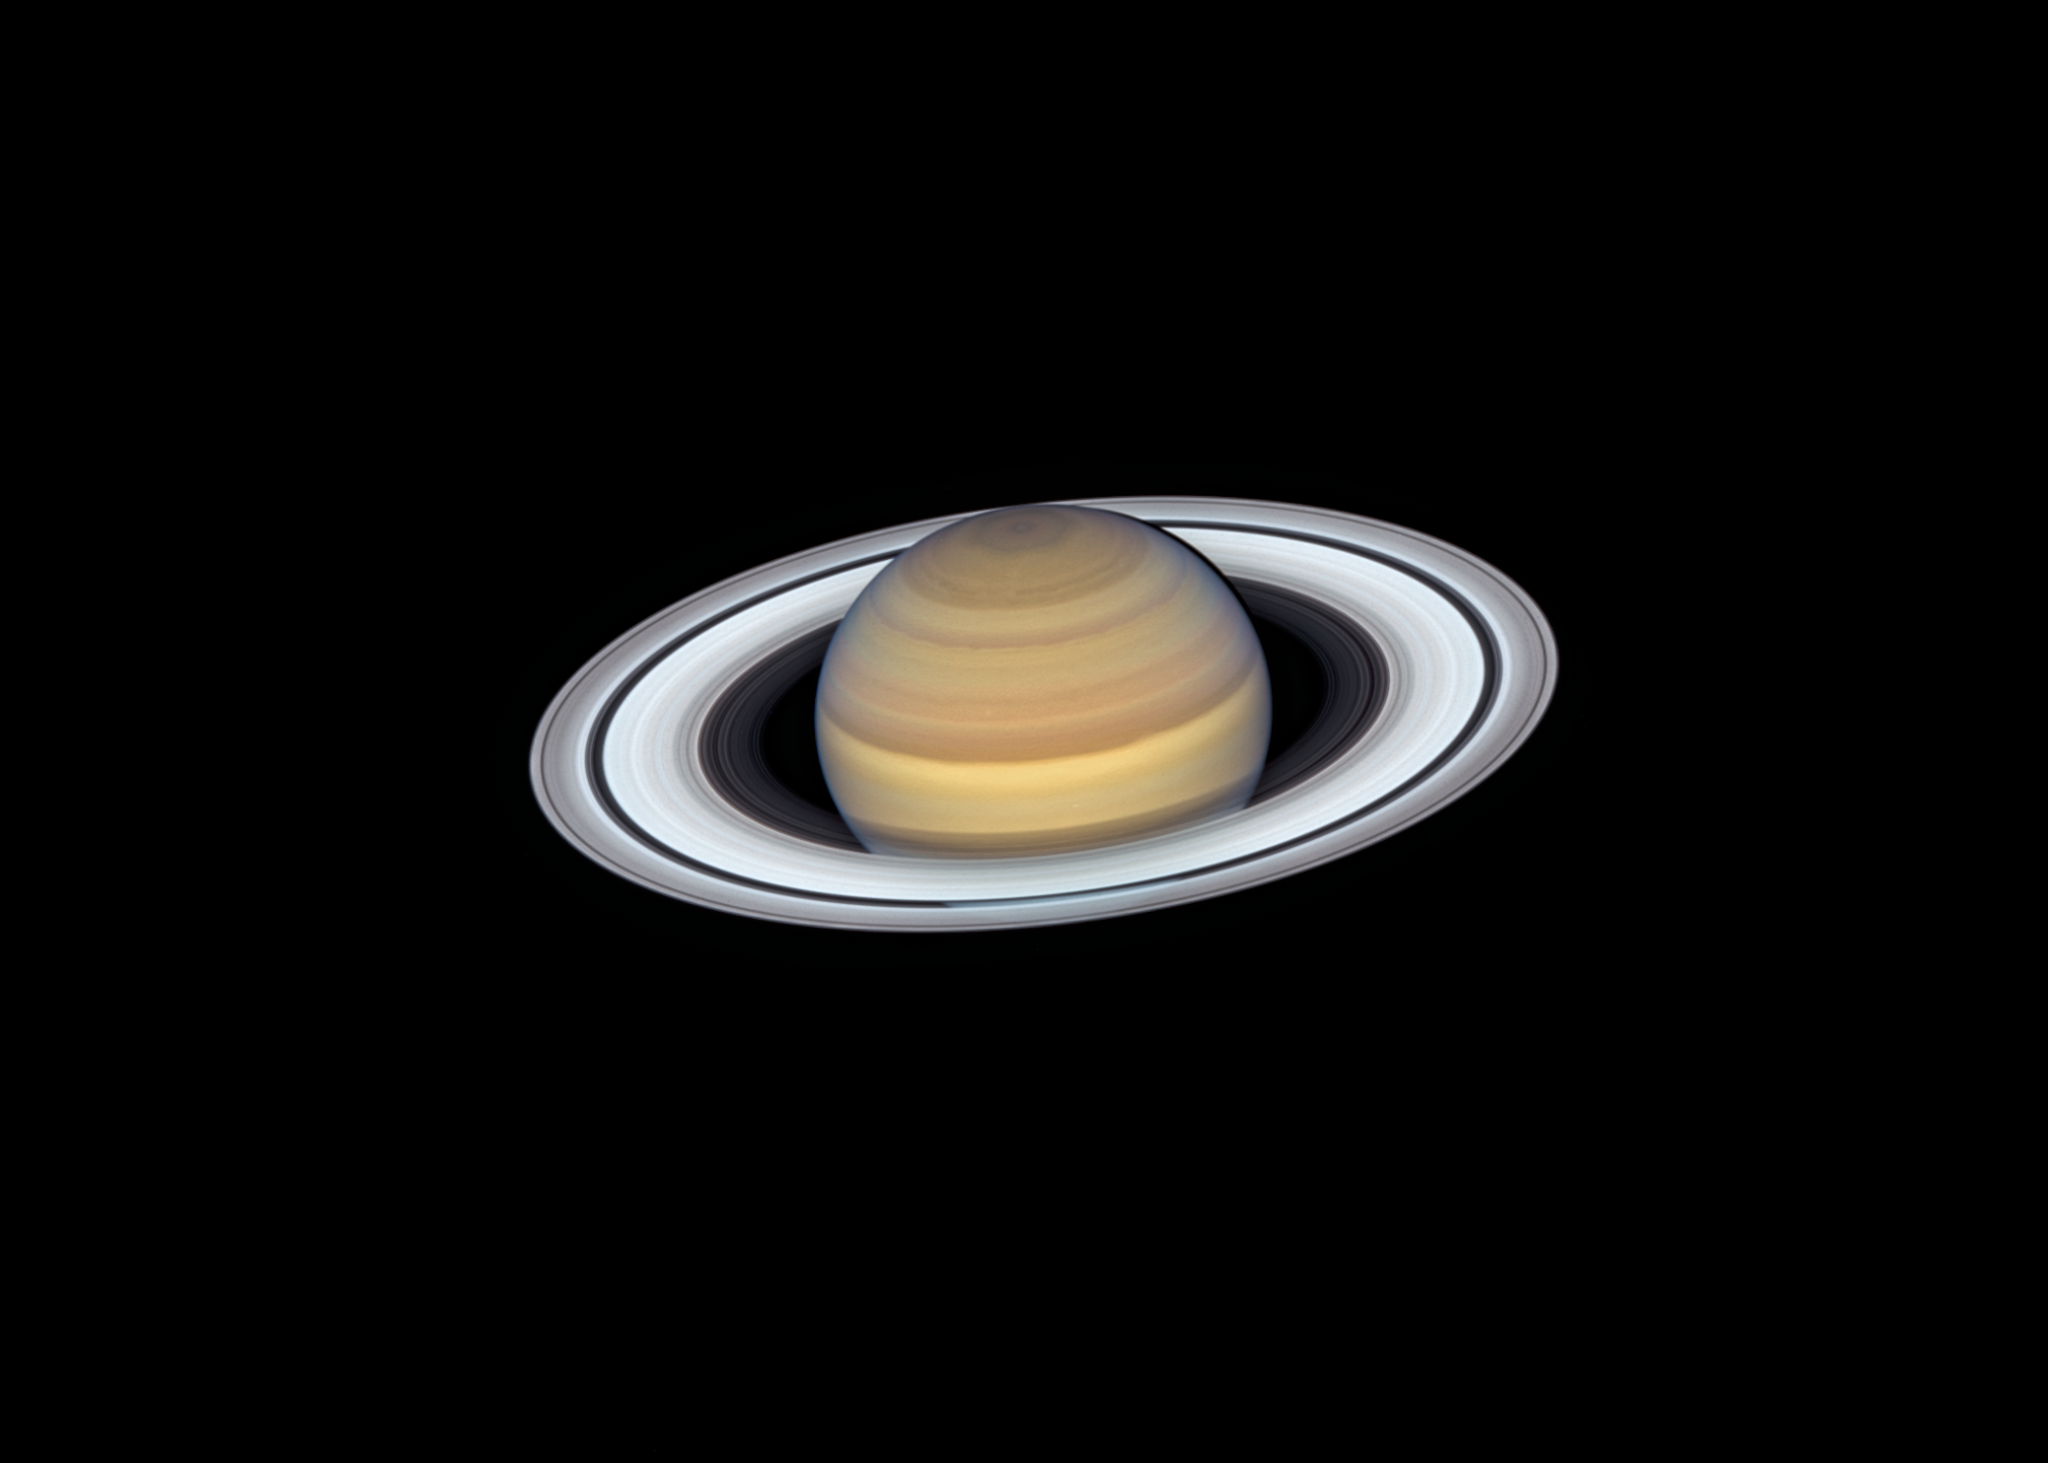 2019 image of Saturn from Hubble